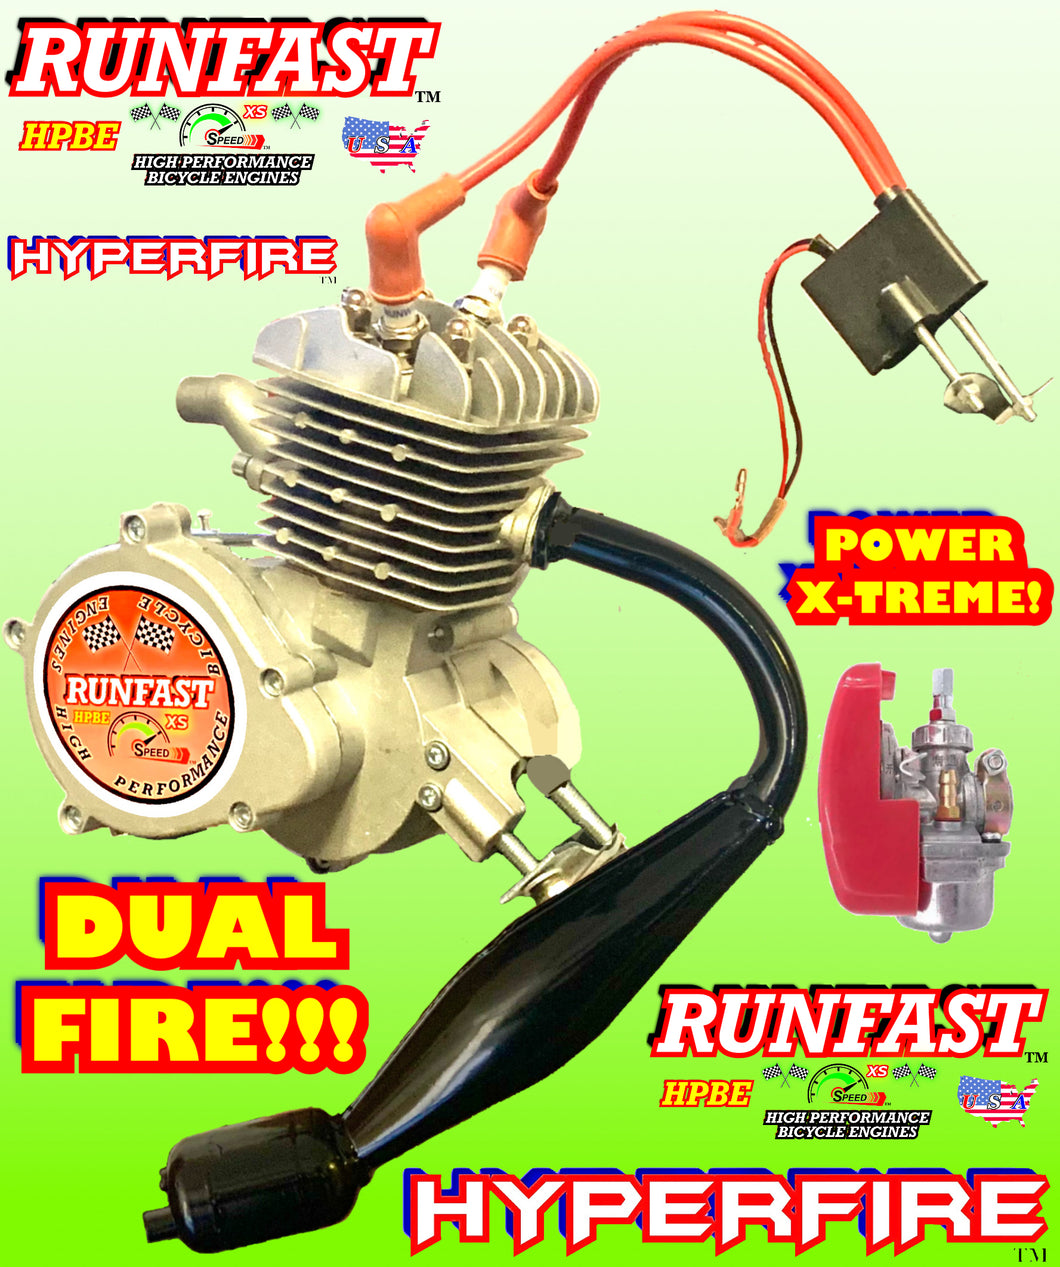 MONSTER HYPERFIRE RUNFAST TM 2-stroke 66cc/80cc SUPERPOWER Motorized Bike ENGINE FOR MOTORIZED BICYCLE WITH HYPERMAXX POWER PIPE AND SPEED CARBURETOR